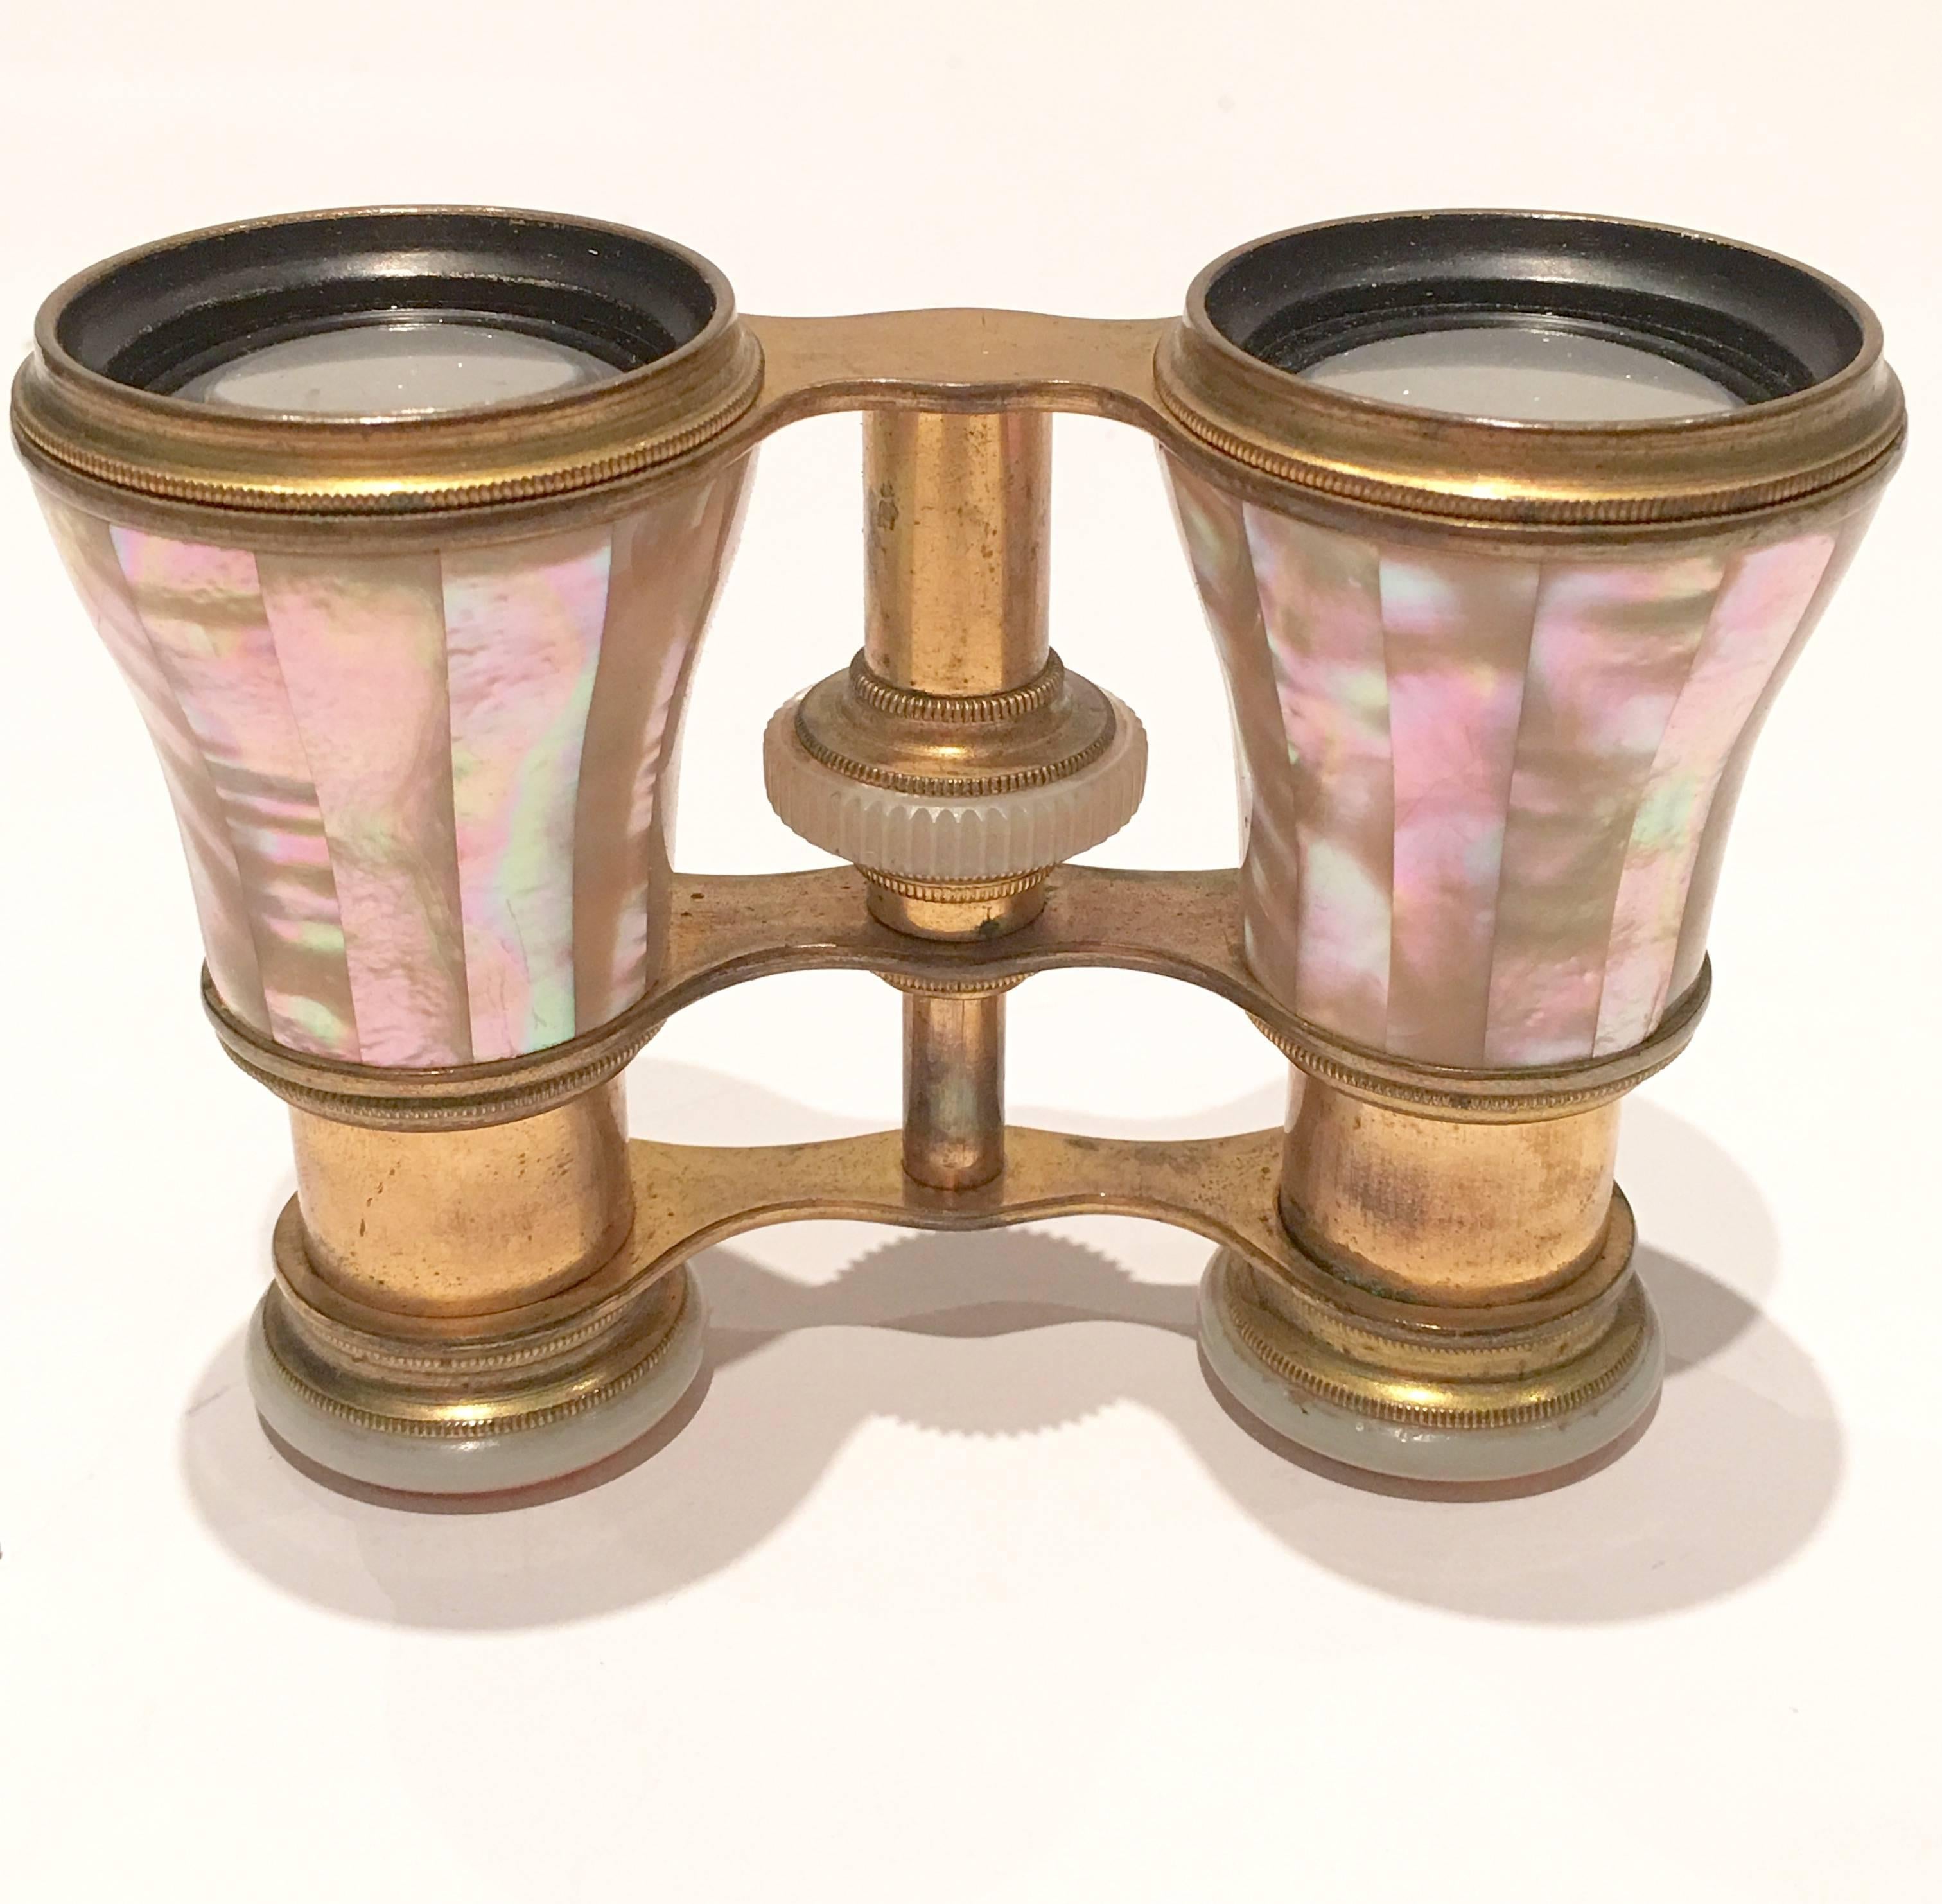 1920s LePert signed french mother-of-pearl and brass opera glasses with original shagreen case with brass closure. Optics in tact.